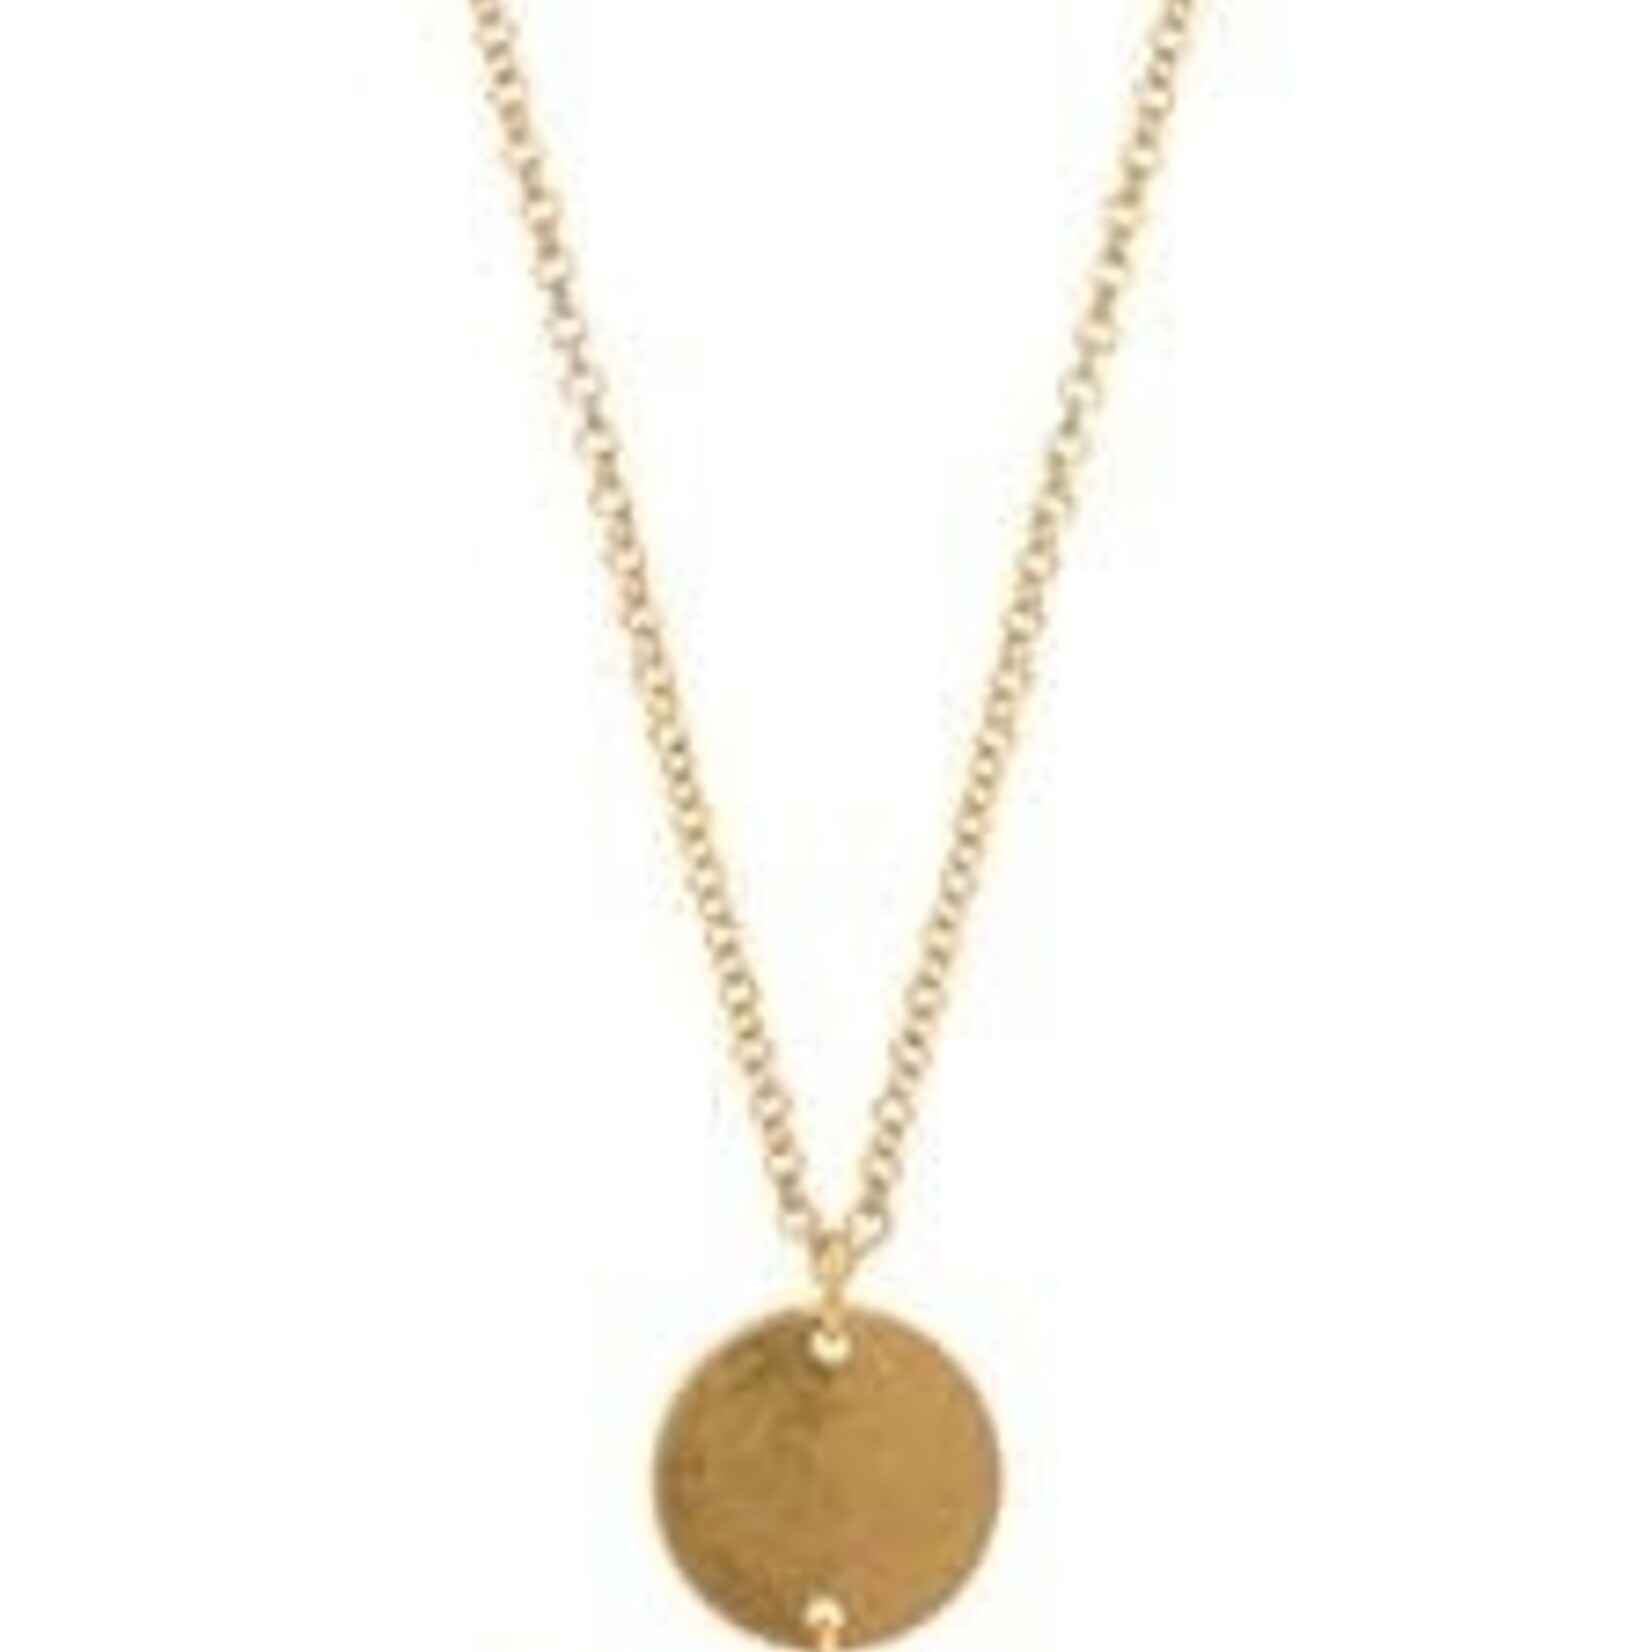 Long Necklace with a Gold Circle Pendant - Horizon Collection